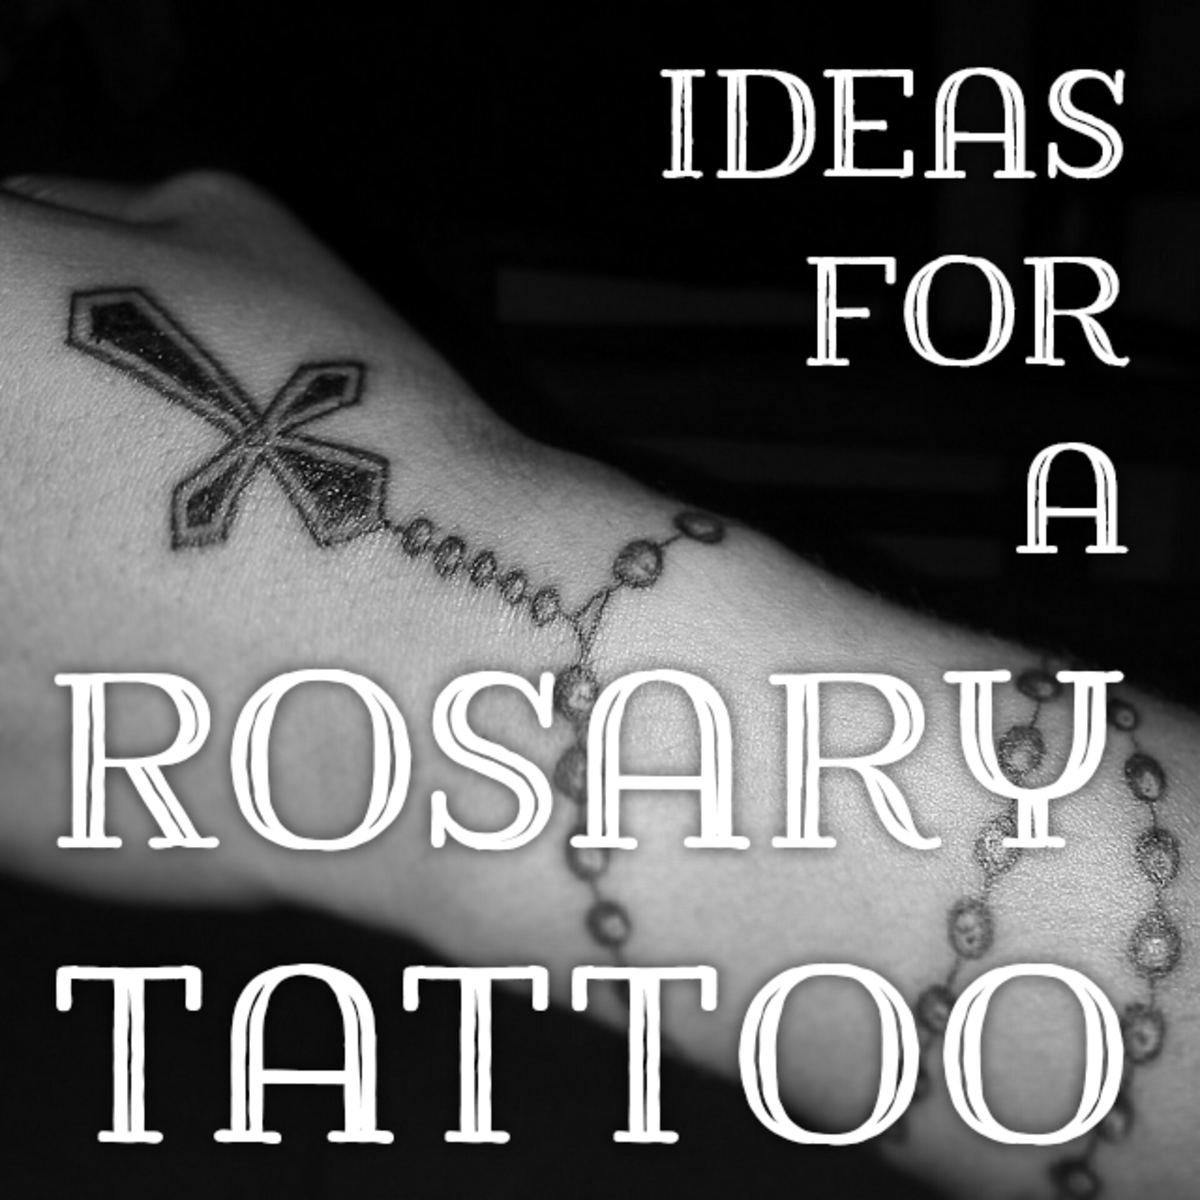 Rosary Bead Tattoo Ideas, Designs, and Meanings - TatRing